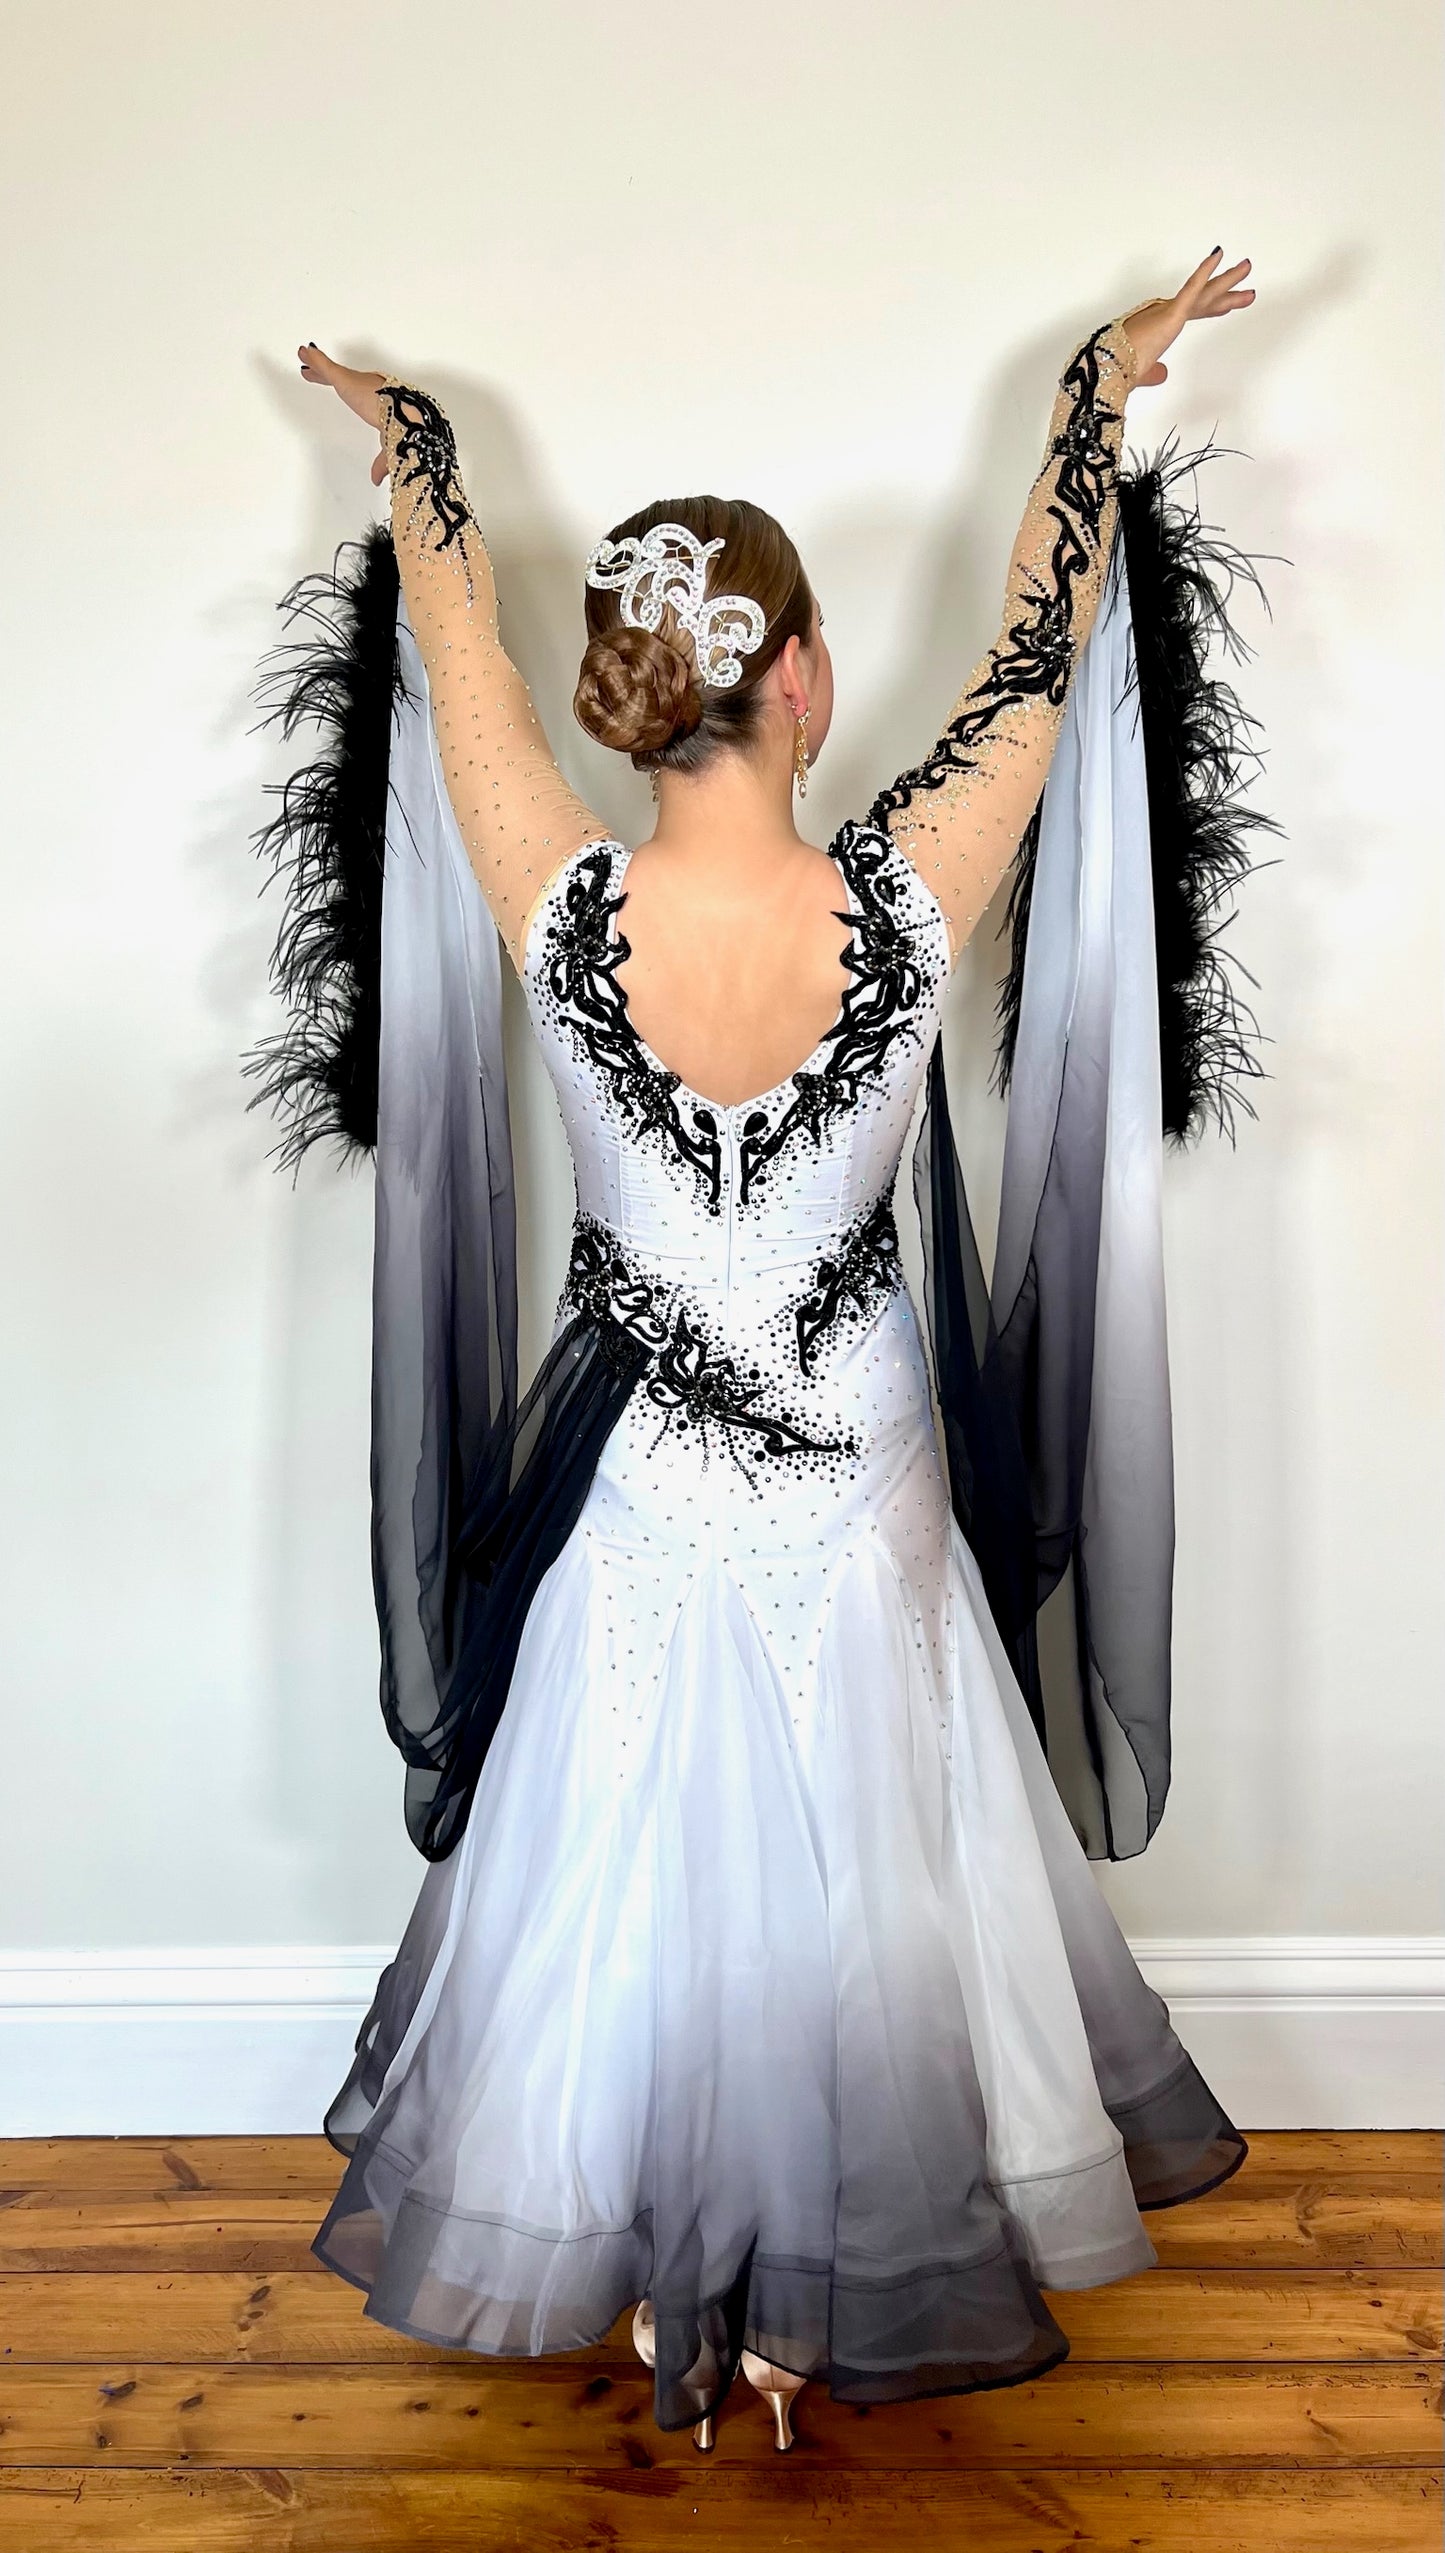 007 Black & White Ombré Ballroom Dress. Black ostrich feather float decoration with Ombré floats. Decorated with black appliqué & AB and jet stones.